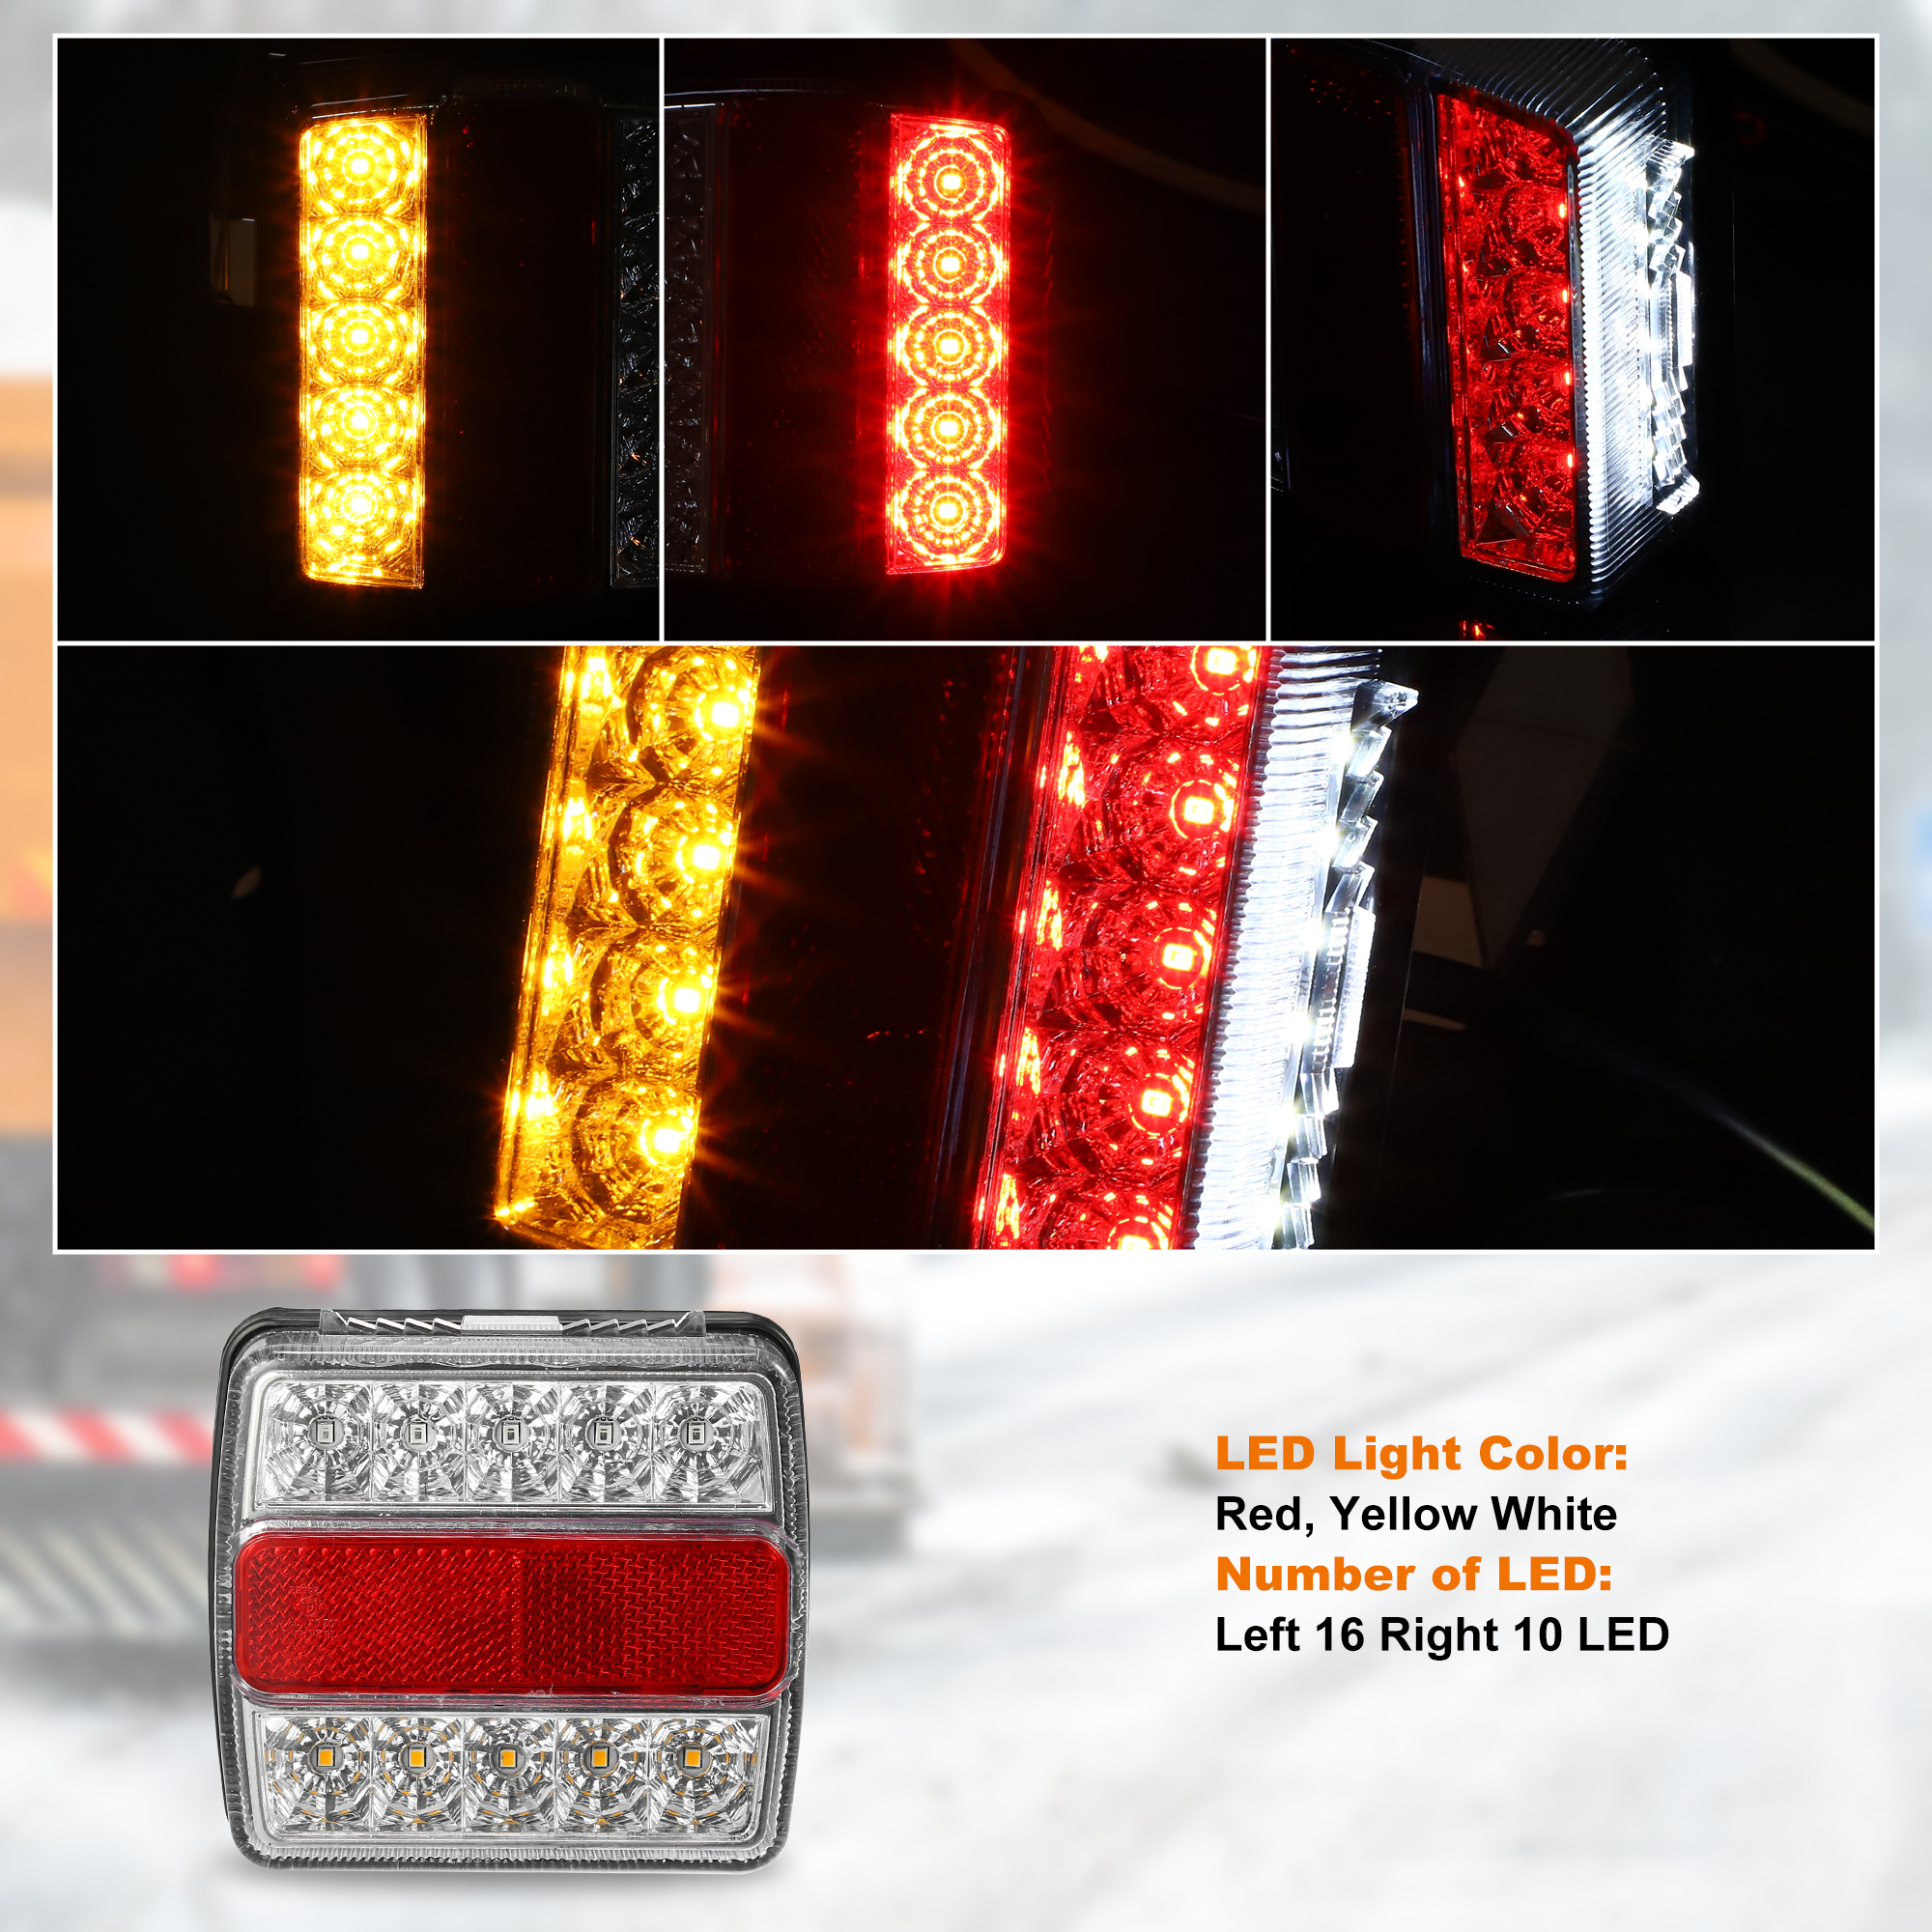 Unique Bargains 2pcs Left 16 Right 10 LED White Car Trailer Lights with Plug Red White Amber